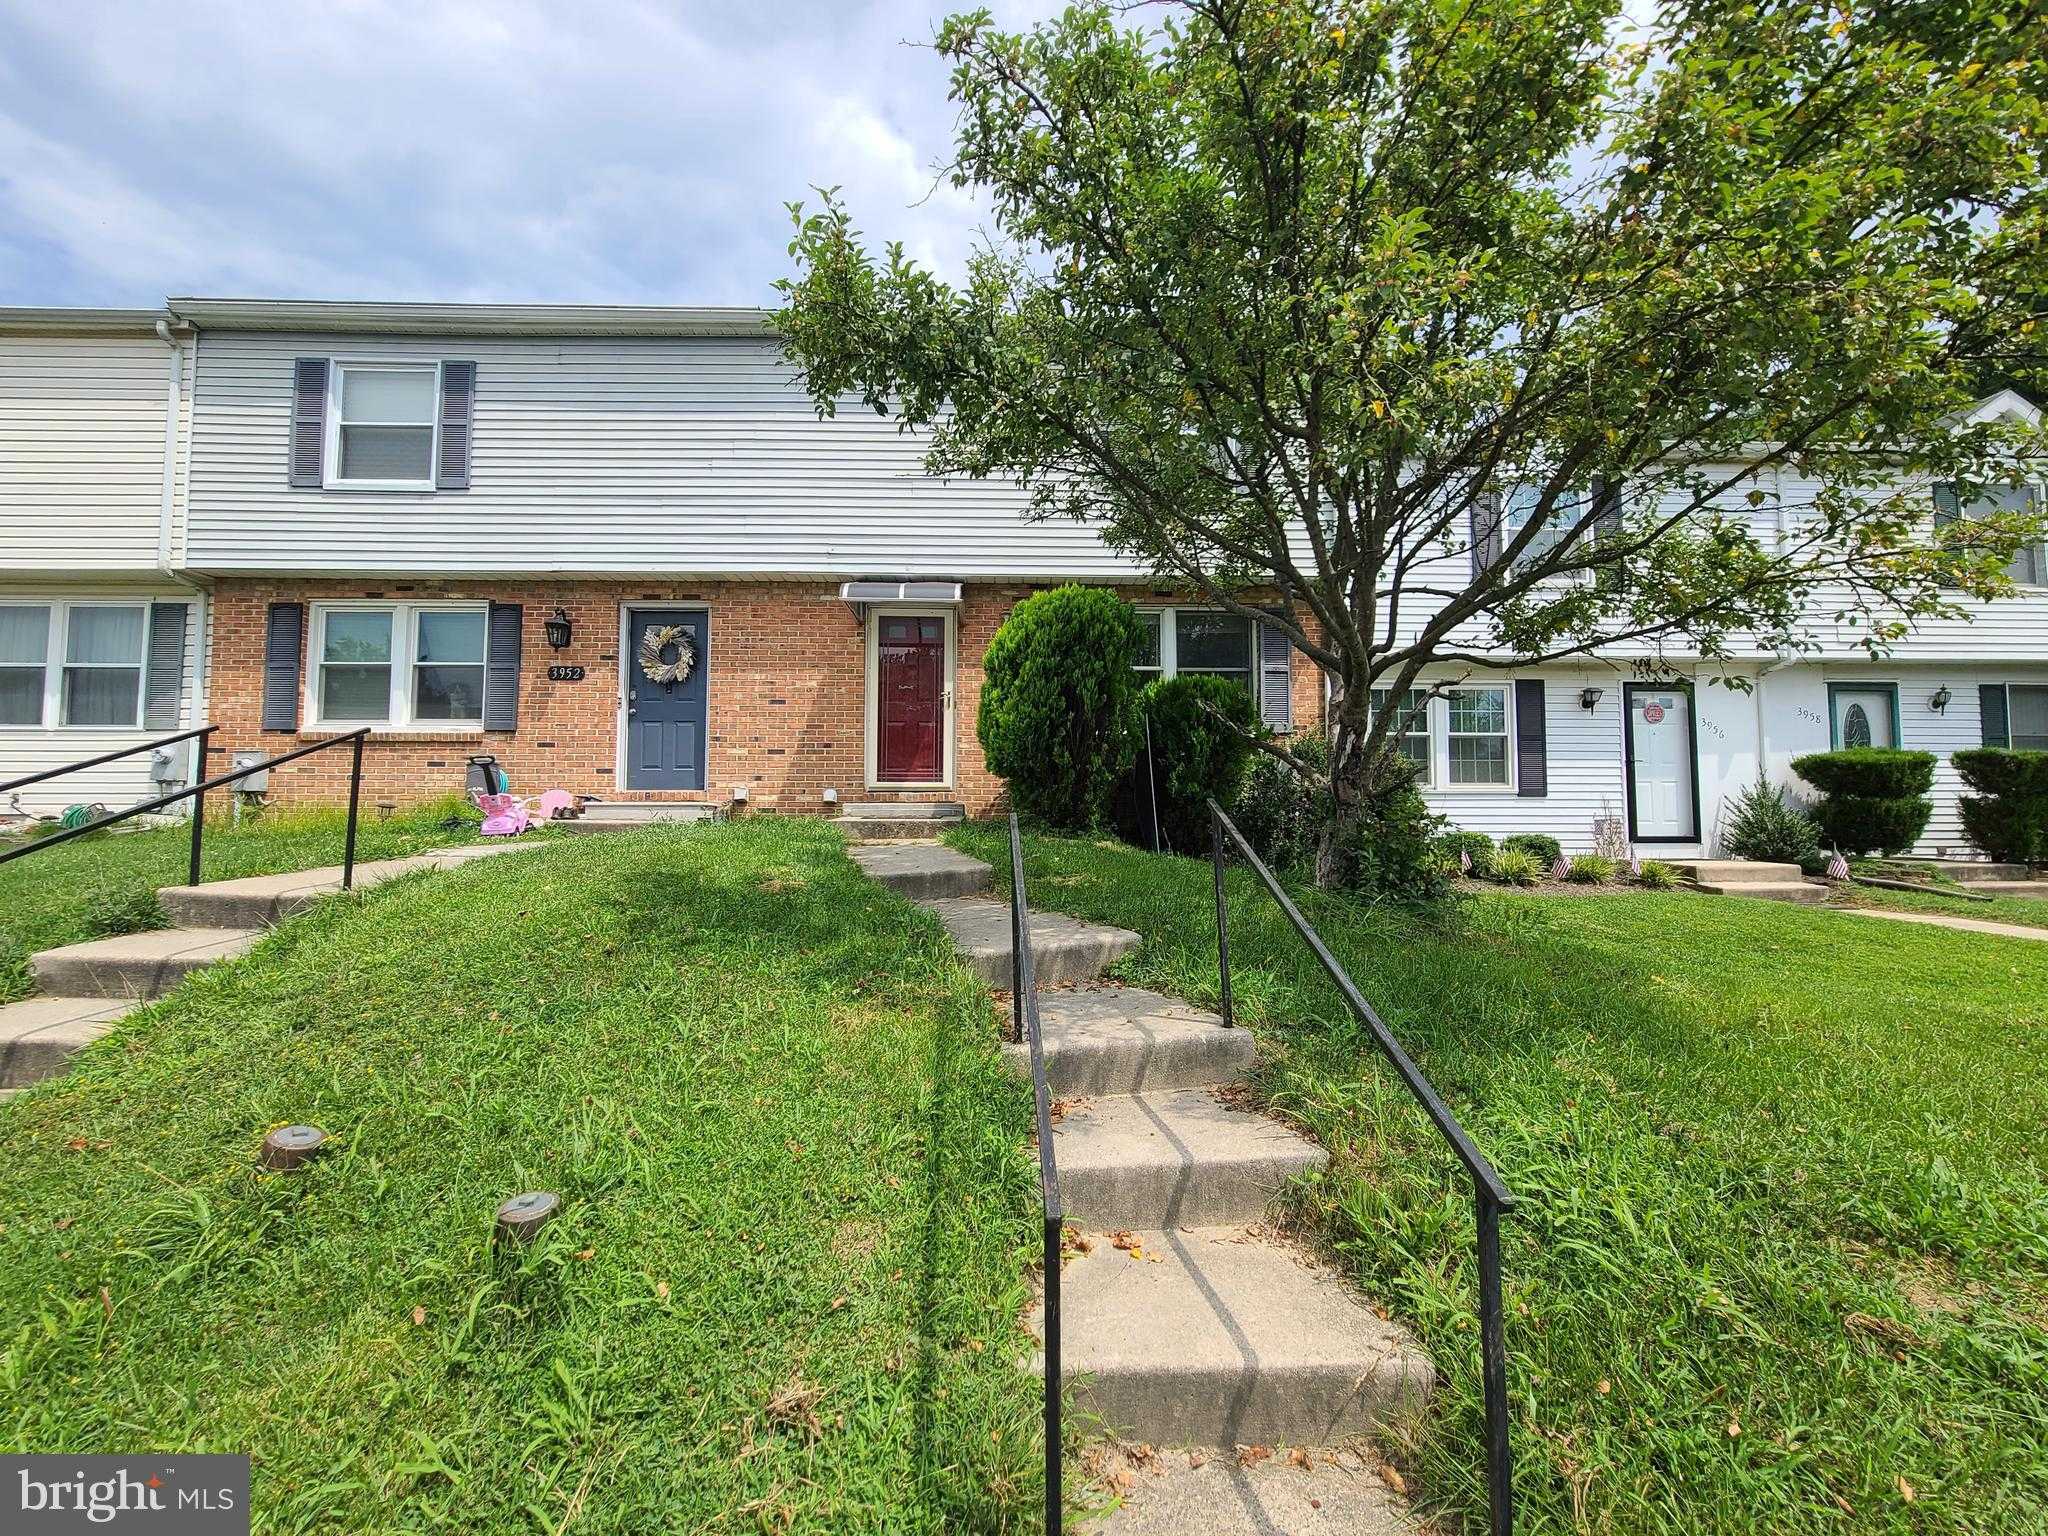 View NOTTINGHAM, MD 21236 townhome